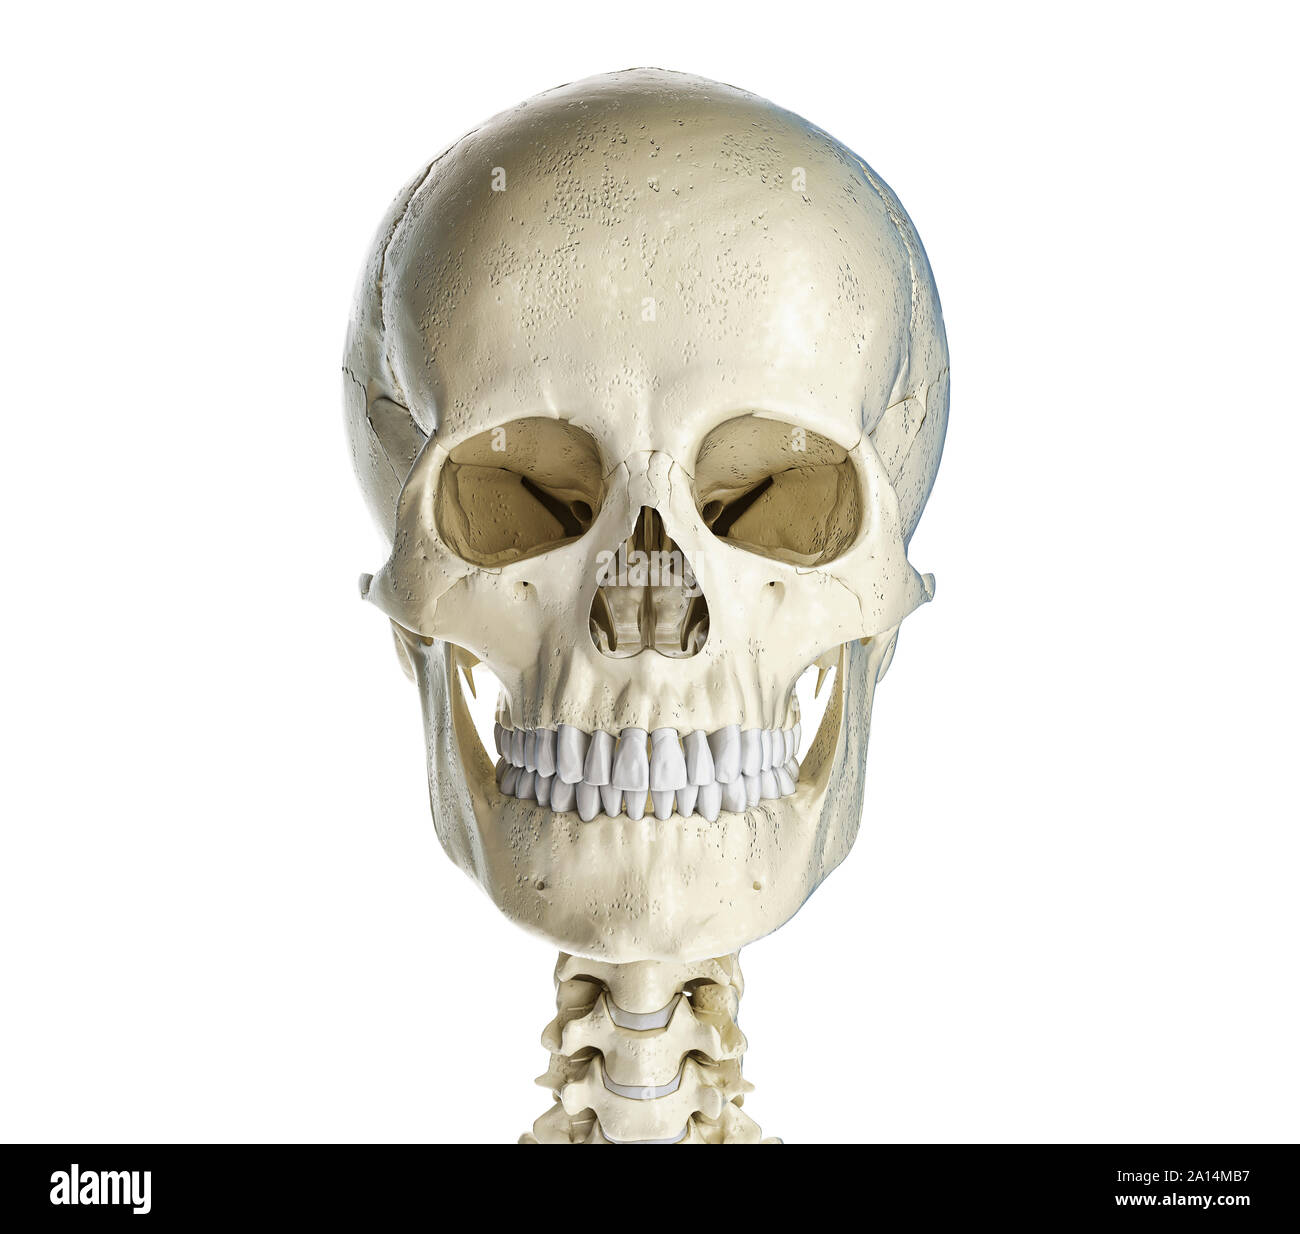 Human skull viewed from the front, on white background. Stock Photo